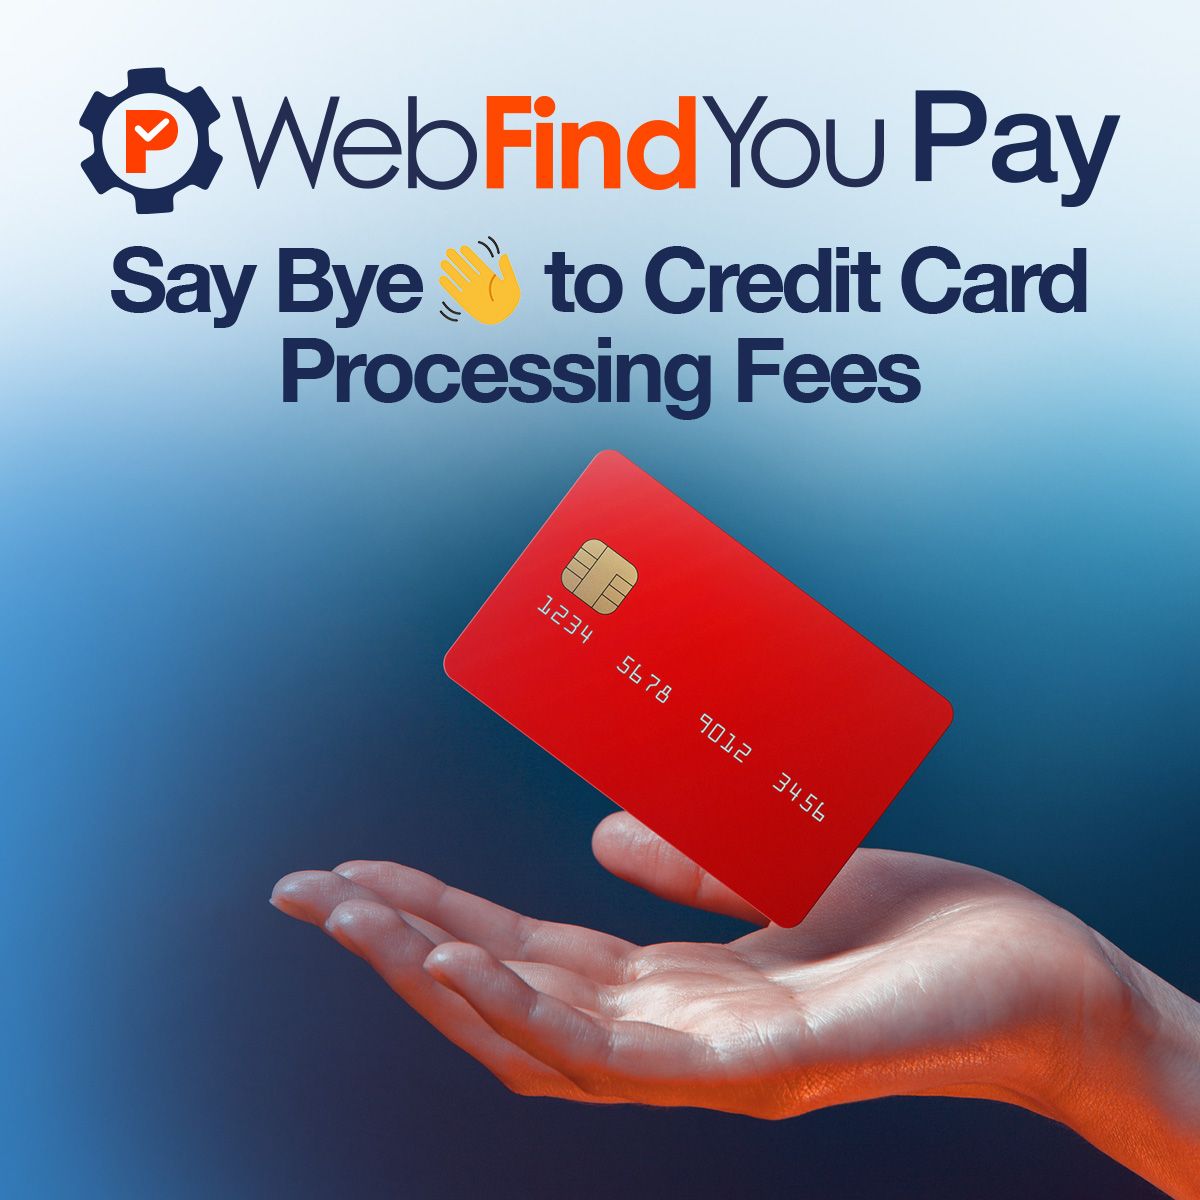 [ (logo) WebFindYou Pay ] Say Bye 👋 to Credit Card Processing Fees